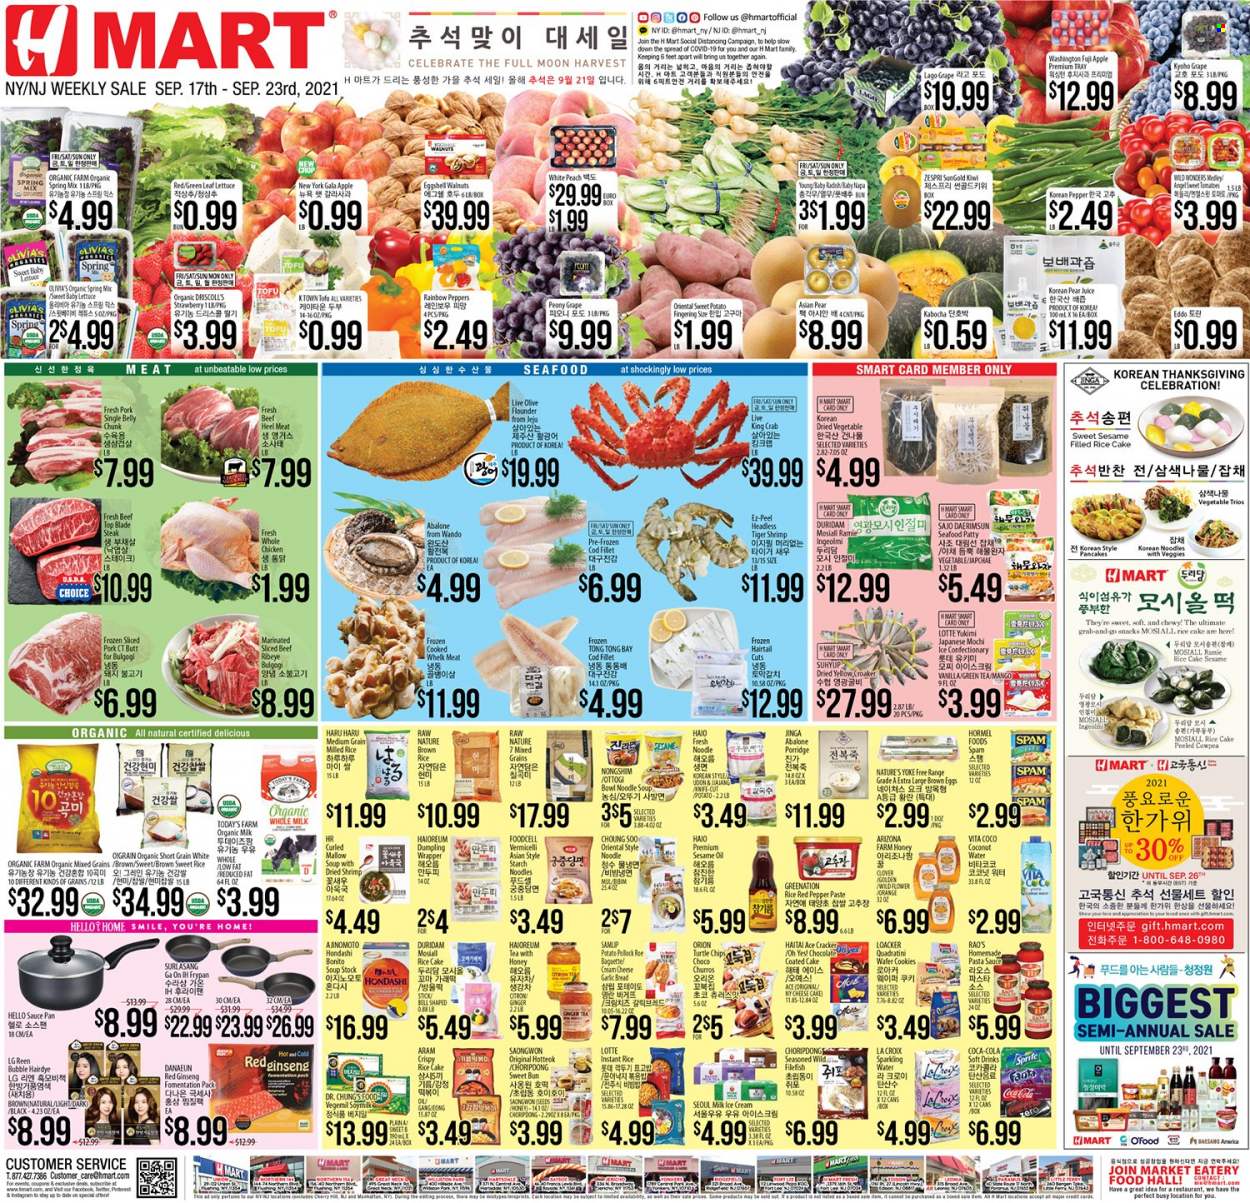 thumbnail - Hmart Flyer - 09/17/2021 - 09/23/2021 - Sales products - baguette, bread, ginger, sweet potato, pumpkin, lettuce, peppers, Gala, kiwi, pears, oranges, Fuji apple, chayote, cod, king crab, seafood, crab, shrimps, abalone, pasta sauce, soup, pancakes, dumplings, noodles, Hormel, Spam, cream cheese, cheese, tofu, soy milk, organic milk, eggs, ice cream, cookies, wafers, snack, Celebration, crackers, starch, porridge, brown rice, sesame oil, oil, walnuts, Coca-Cola, Fanta, soft drink, AriZona, sparkling water, tea, whole chicken, beef meat, steak, top blade, wrapper, knife, tray, pan, saucepan, frying pan, ginseng. Page 1.